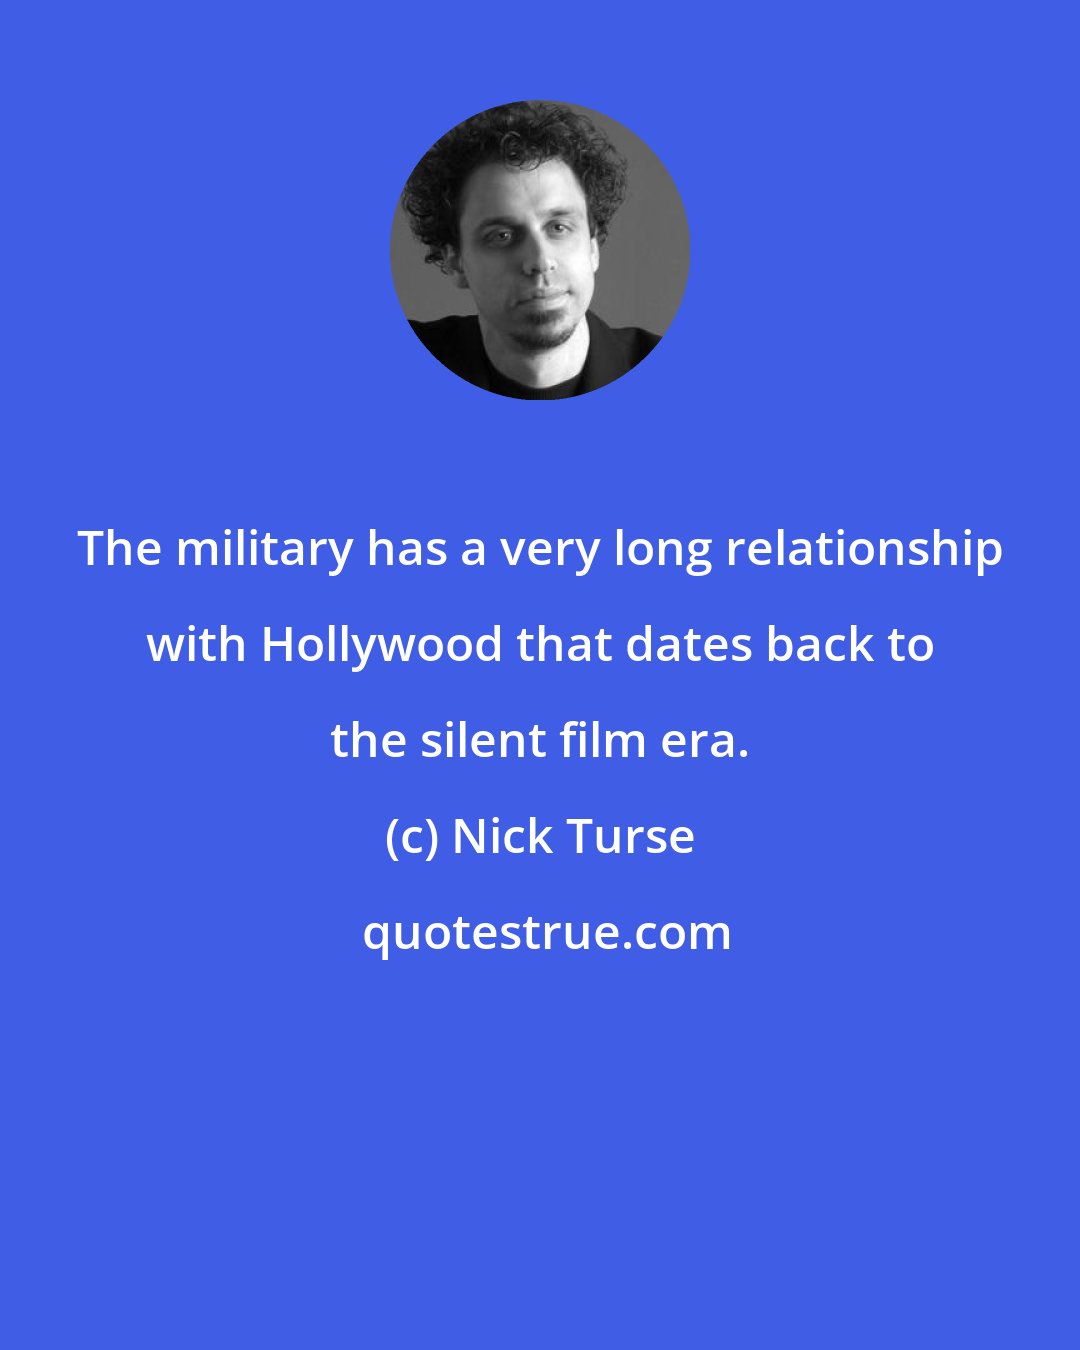 Nick Turse: The military has a very long relationship with Hollywood that dates back to the silent film era.